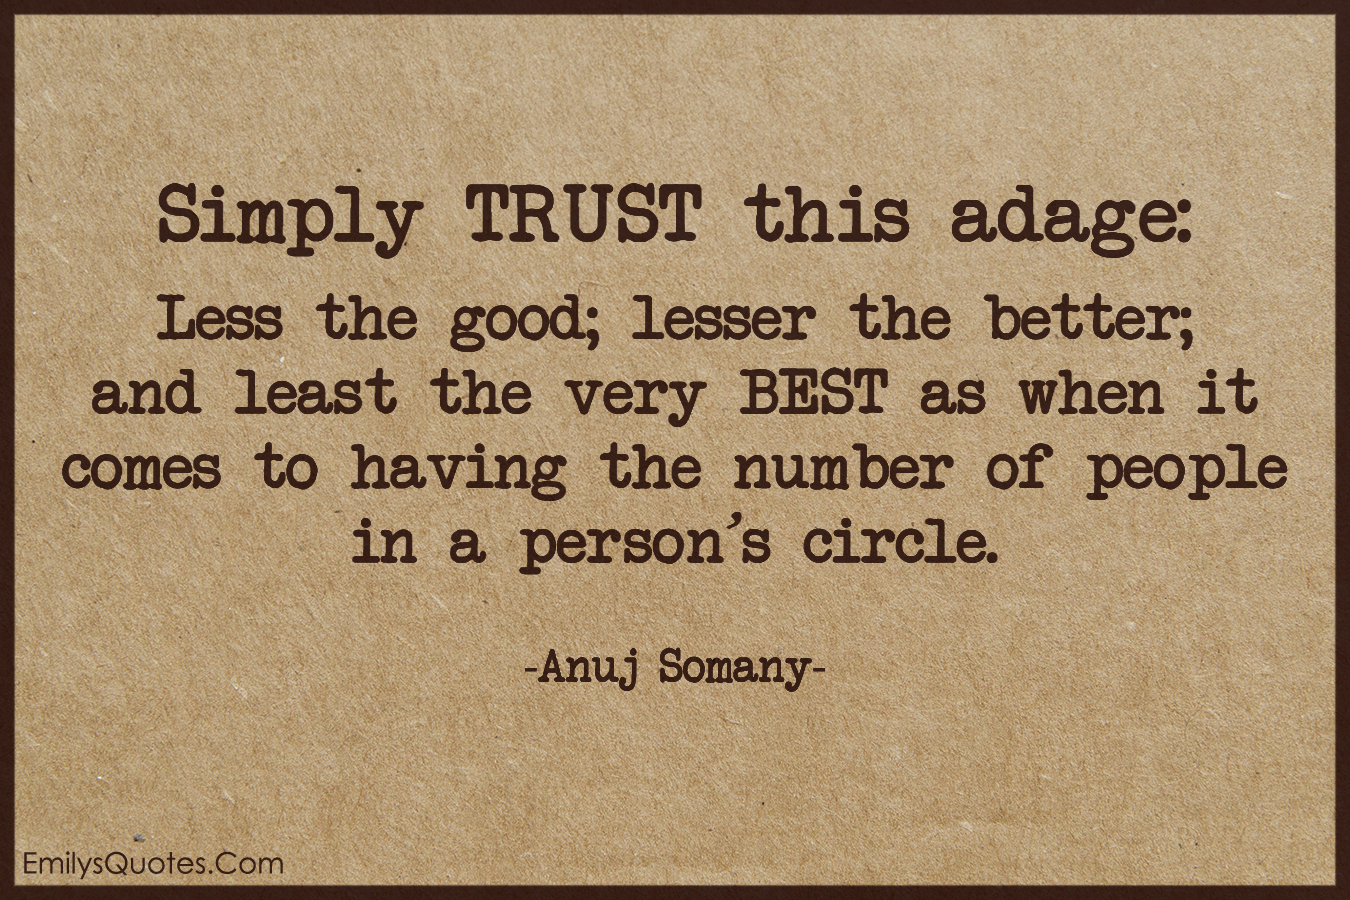 Simply TRUST this adage: Less the good; lesser the better; and least